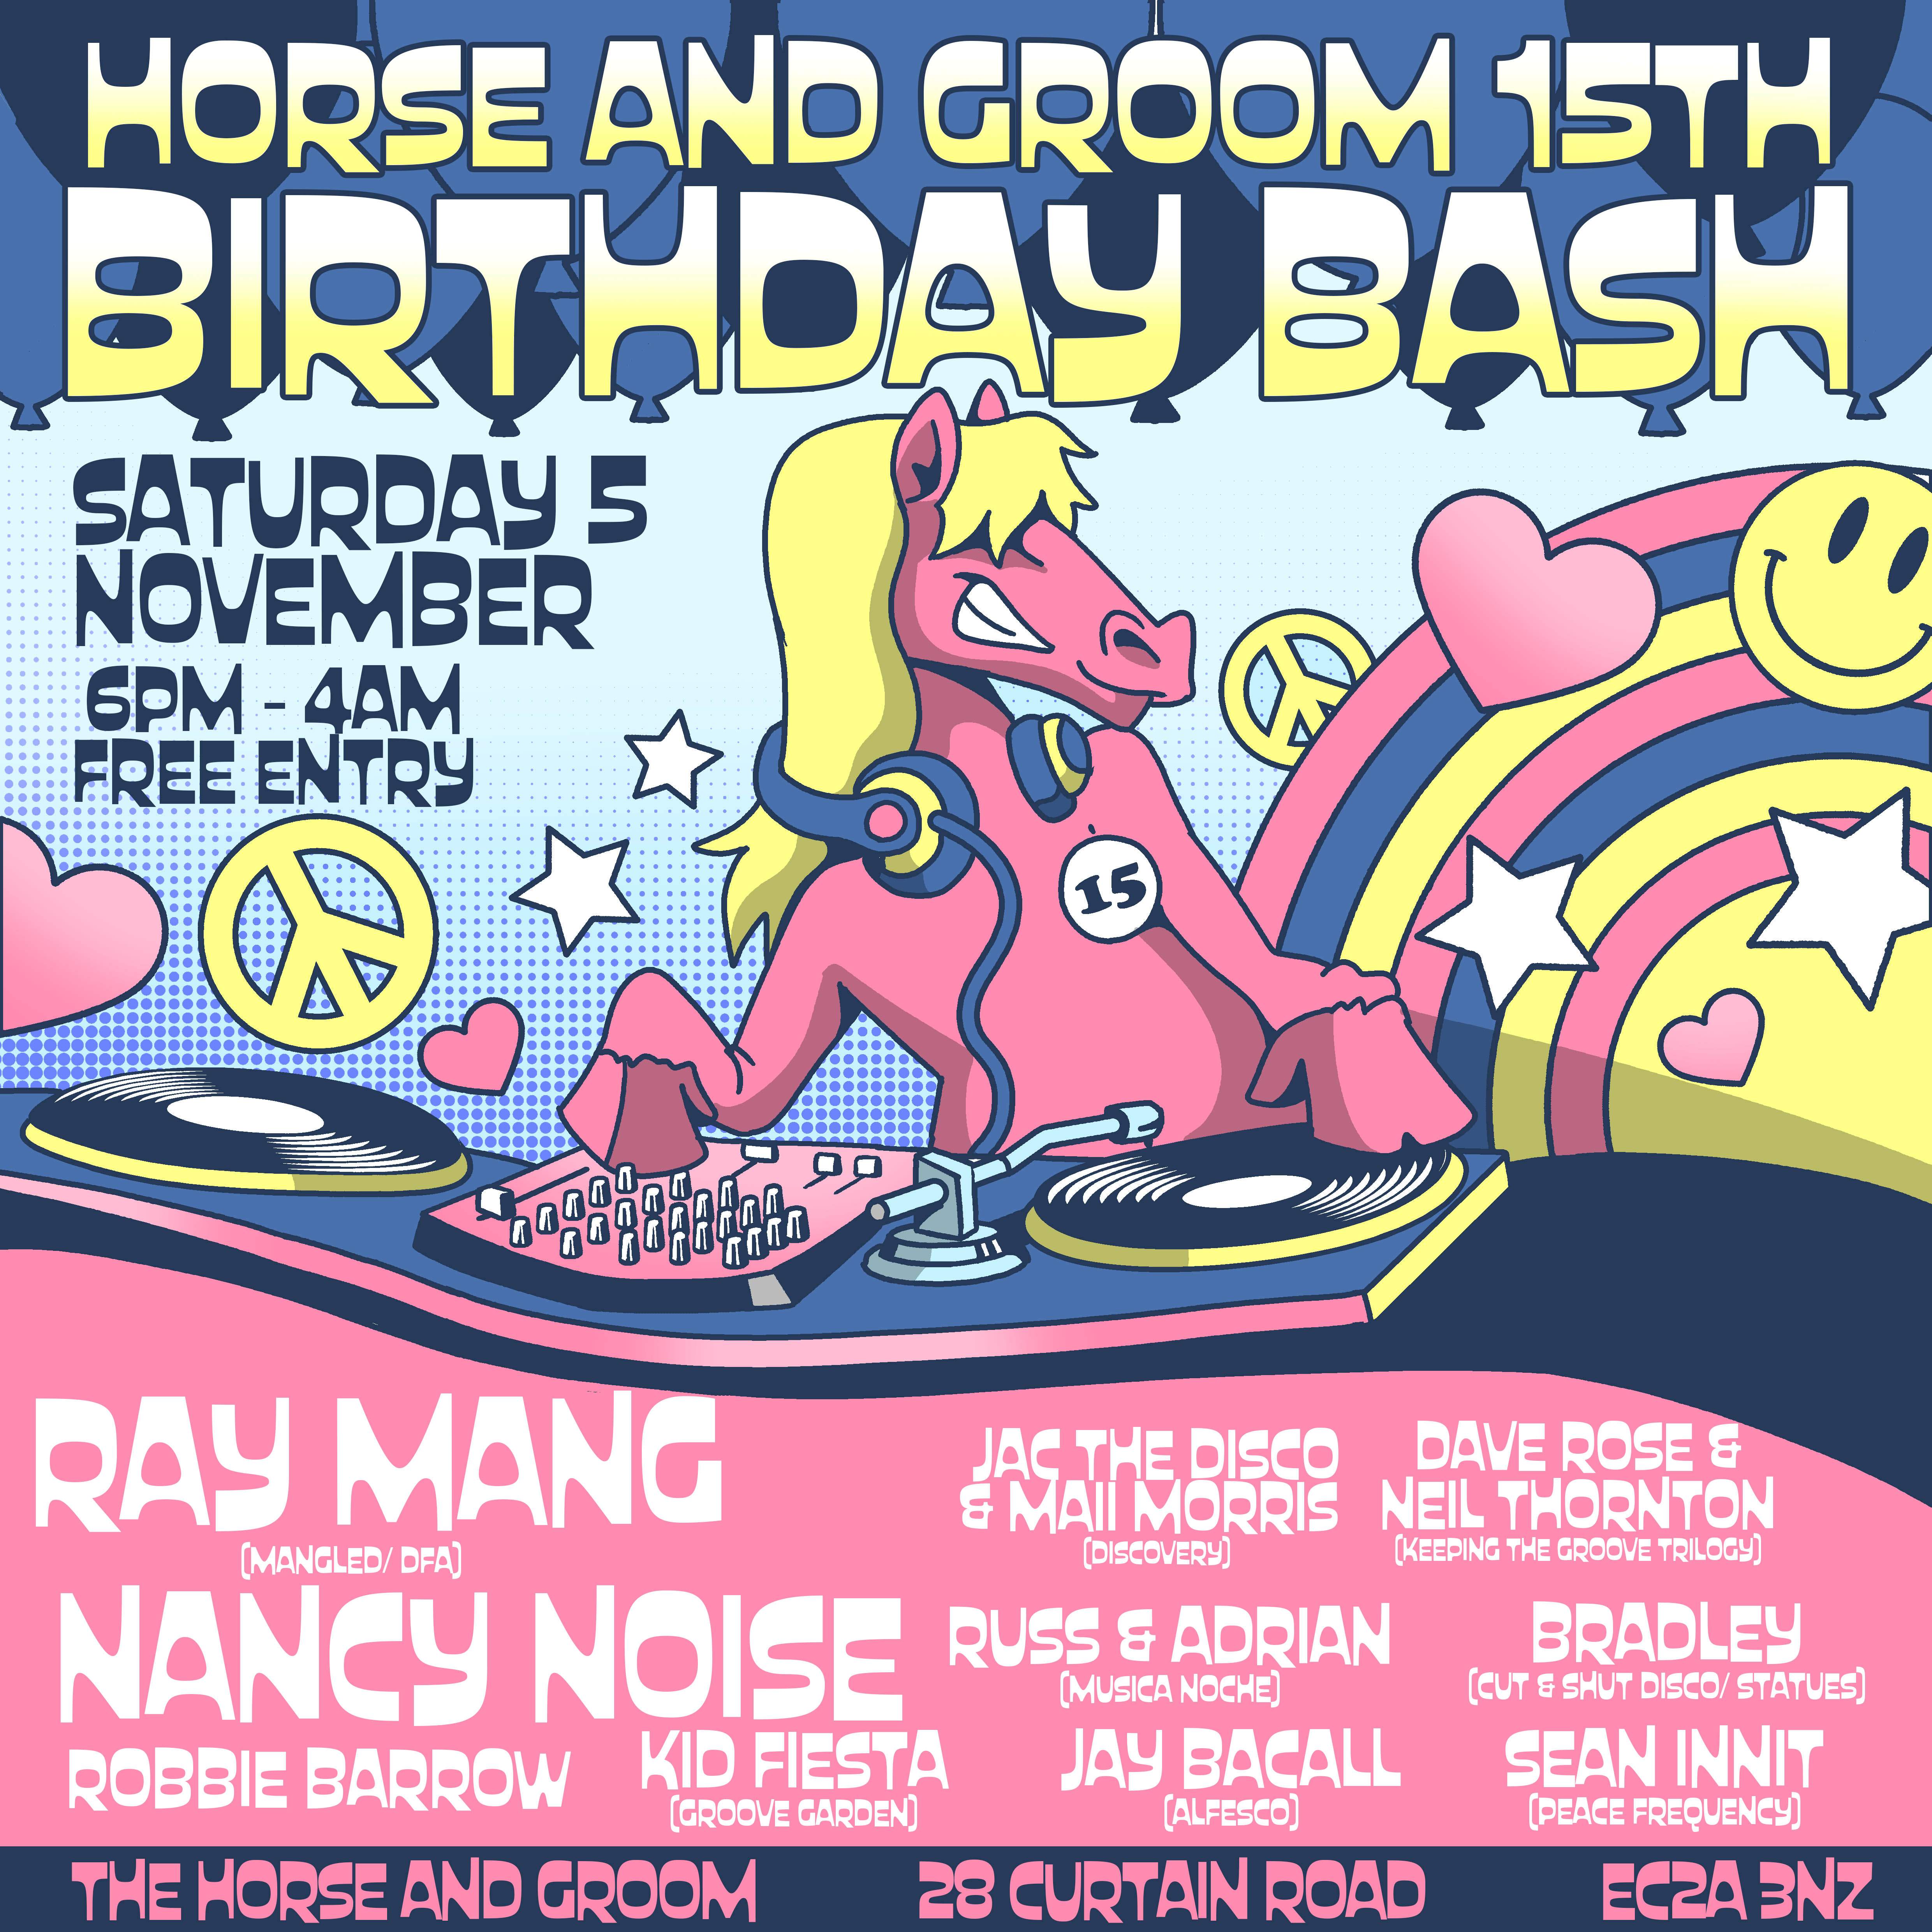 Horse and Groom's 15th free birthday bash w/ Ray Mang & Nancy Noise  - フライヤー裏